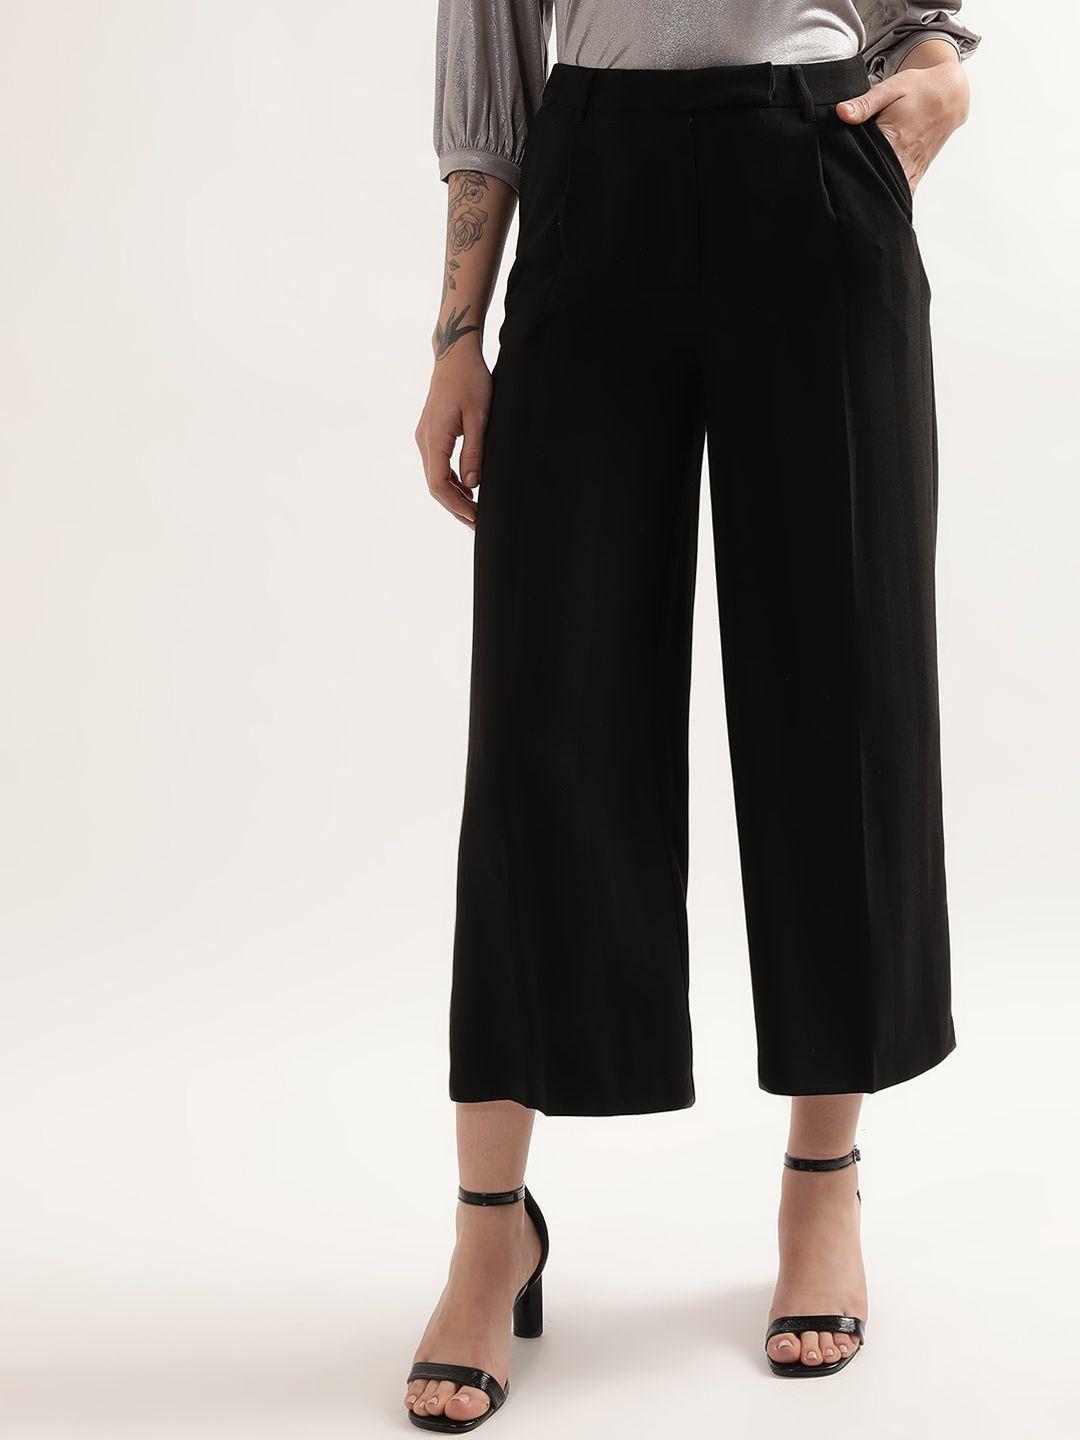 centrestage women high-rise culottes trousers